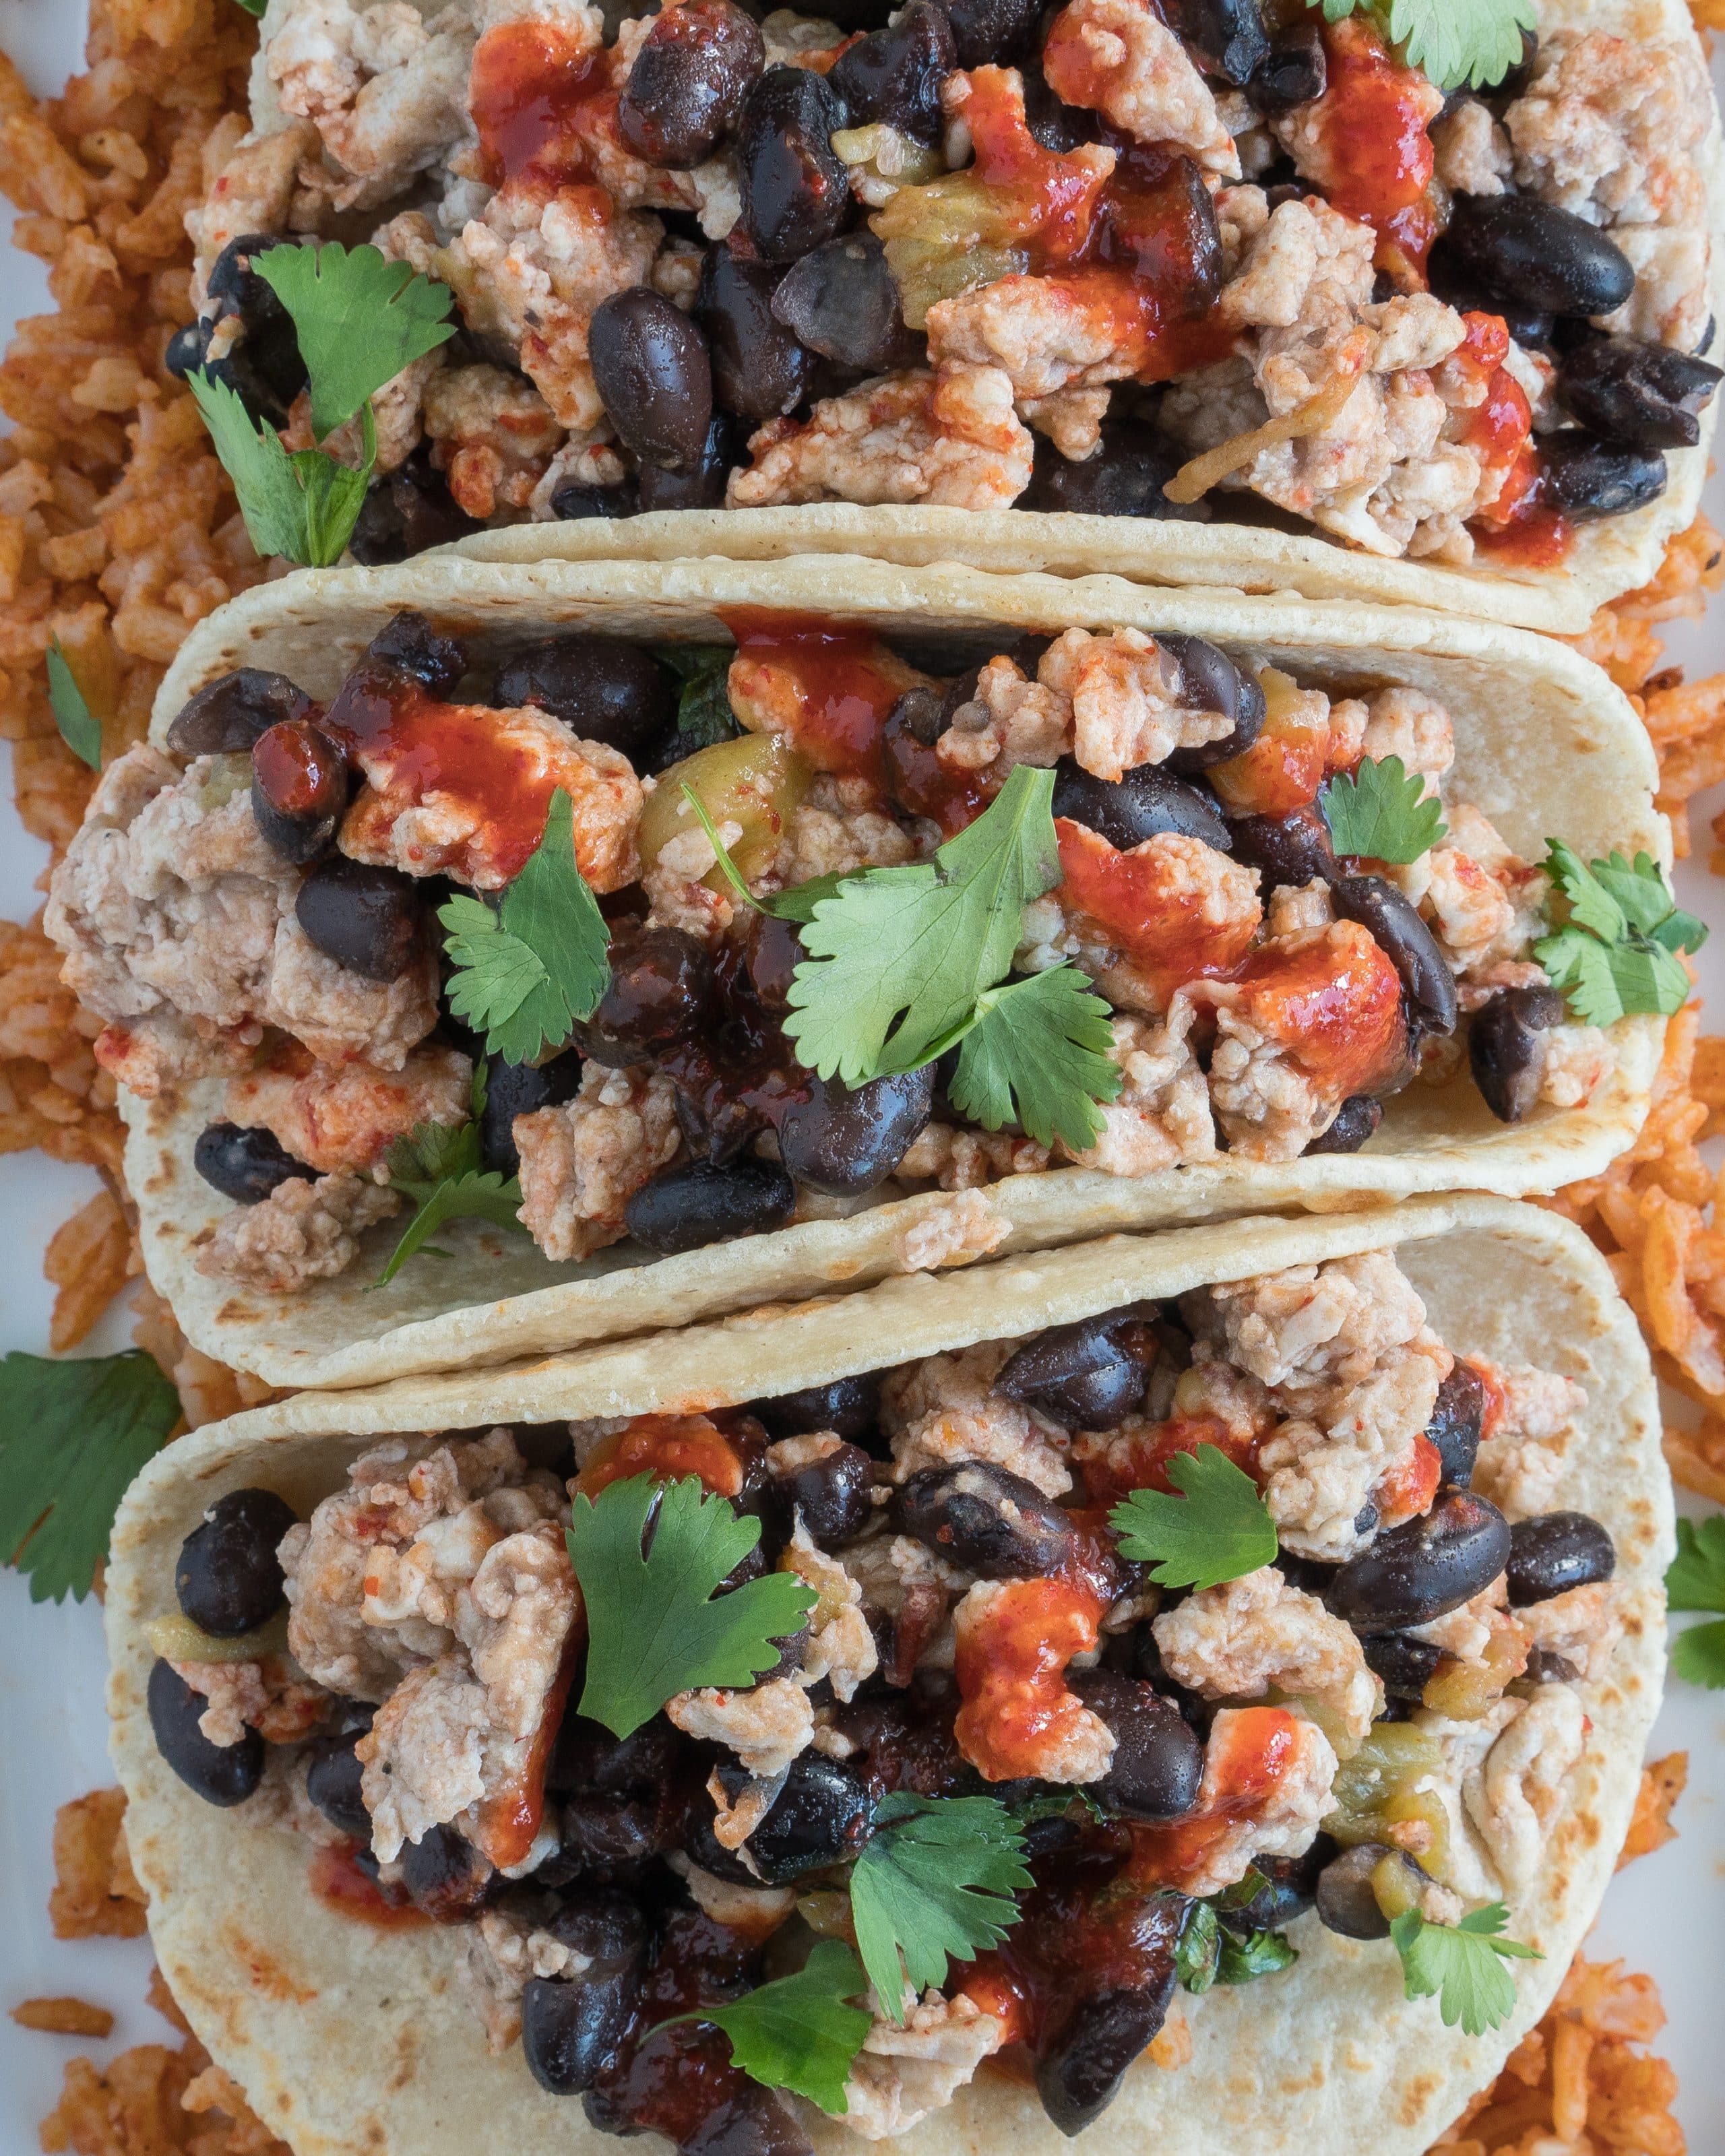 Southwestern Breakfast Tacos – Simple, healthy recipe for Southwestern Breakfast Tacos! This high-protein brunch dish uses egg whites, green hatch chiles, black beans, and shredded cheese with flavors of tomato, coriander, & chili garlic paste. We love that this gluten-free & vegetarian friendly recipe comes together in just 10 minutes! ♥ | freeyourfork.com